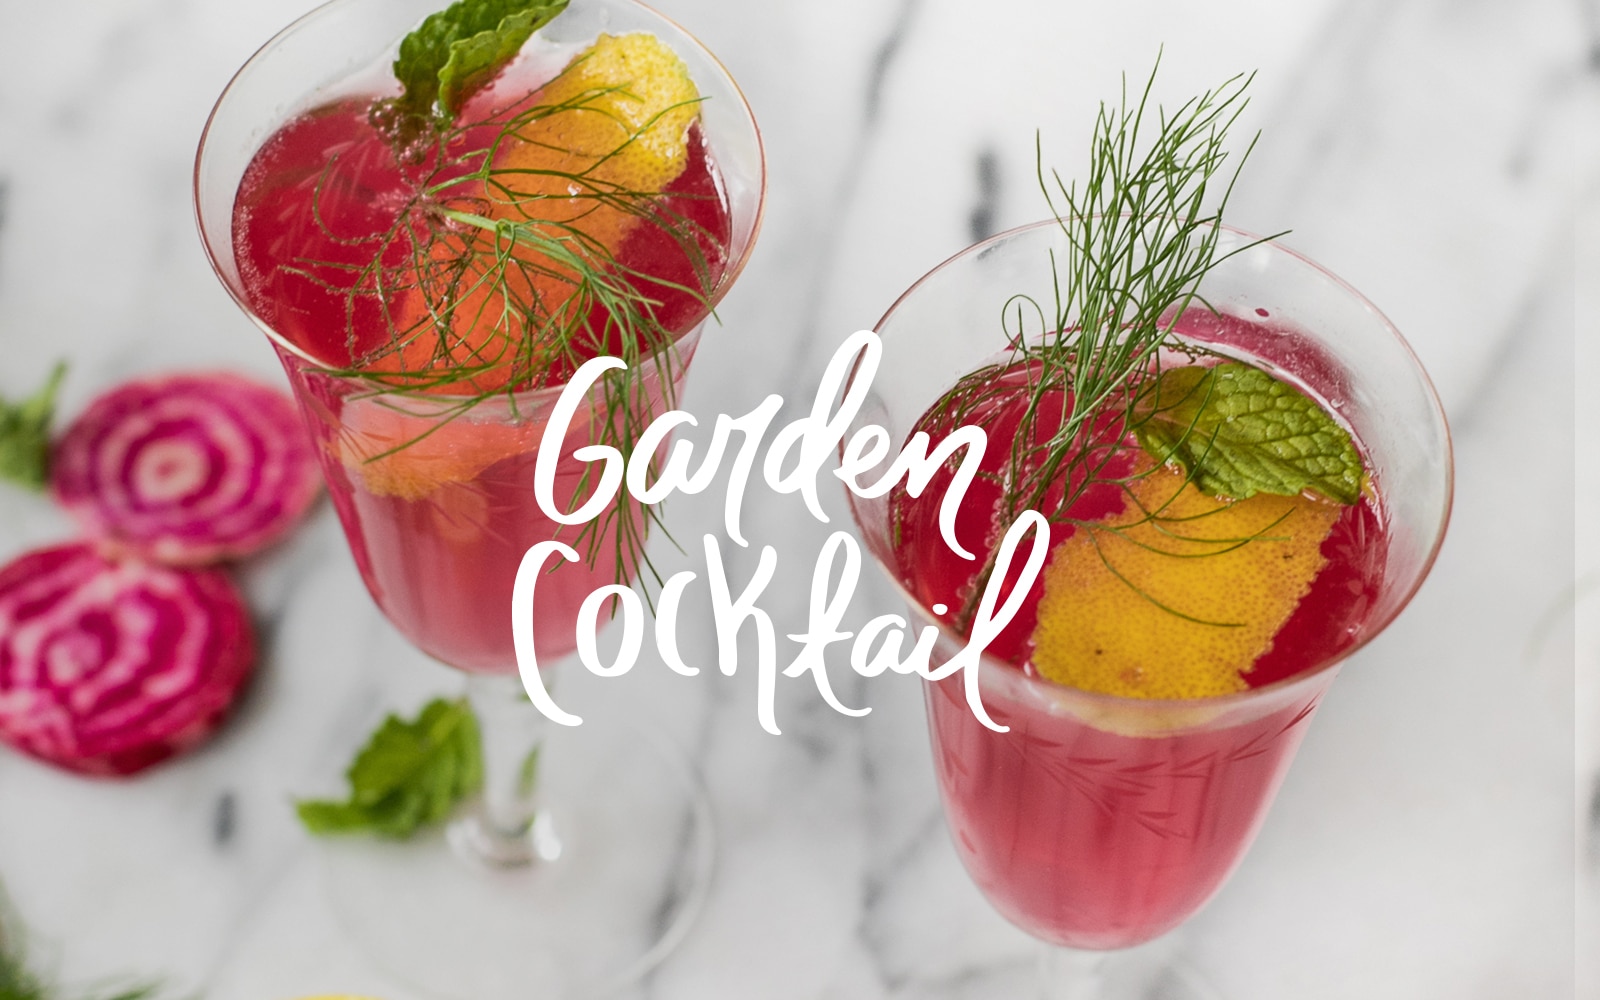 A Beet and Gin Garden Cocktail for spring. Perfect for a spring weekend sip. Get the recipe on The Fresh Exchange